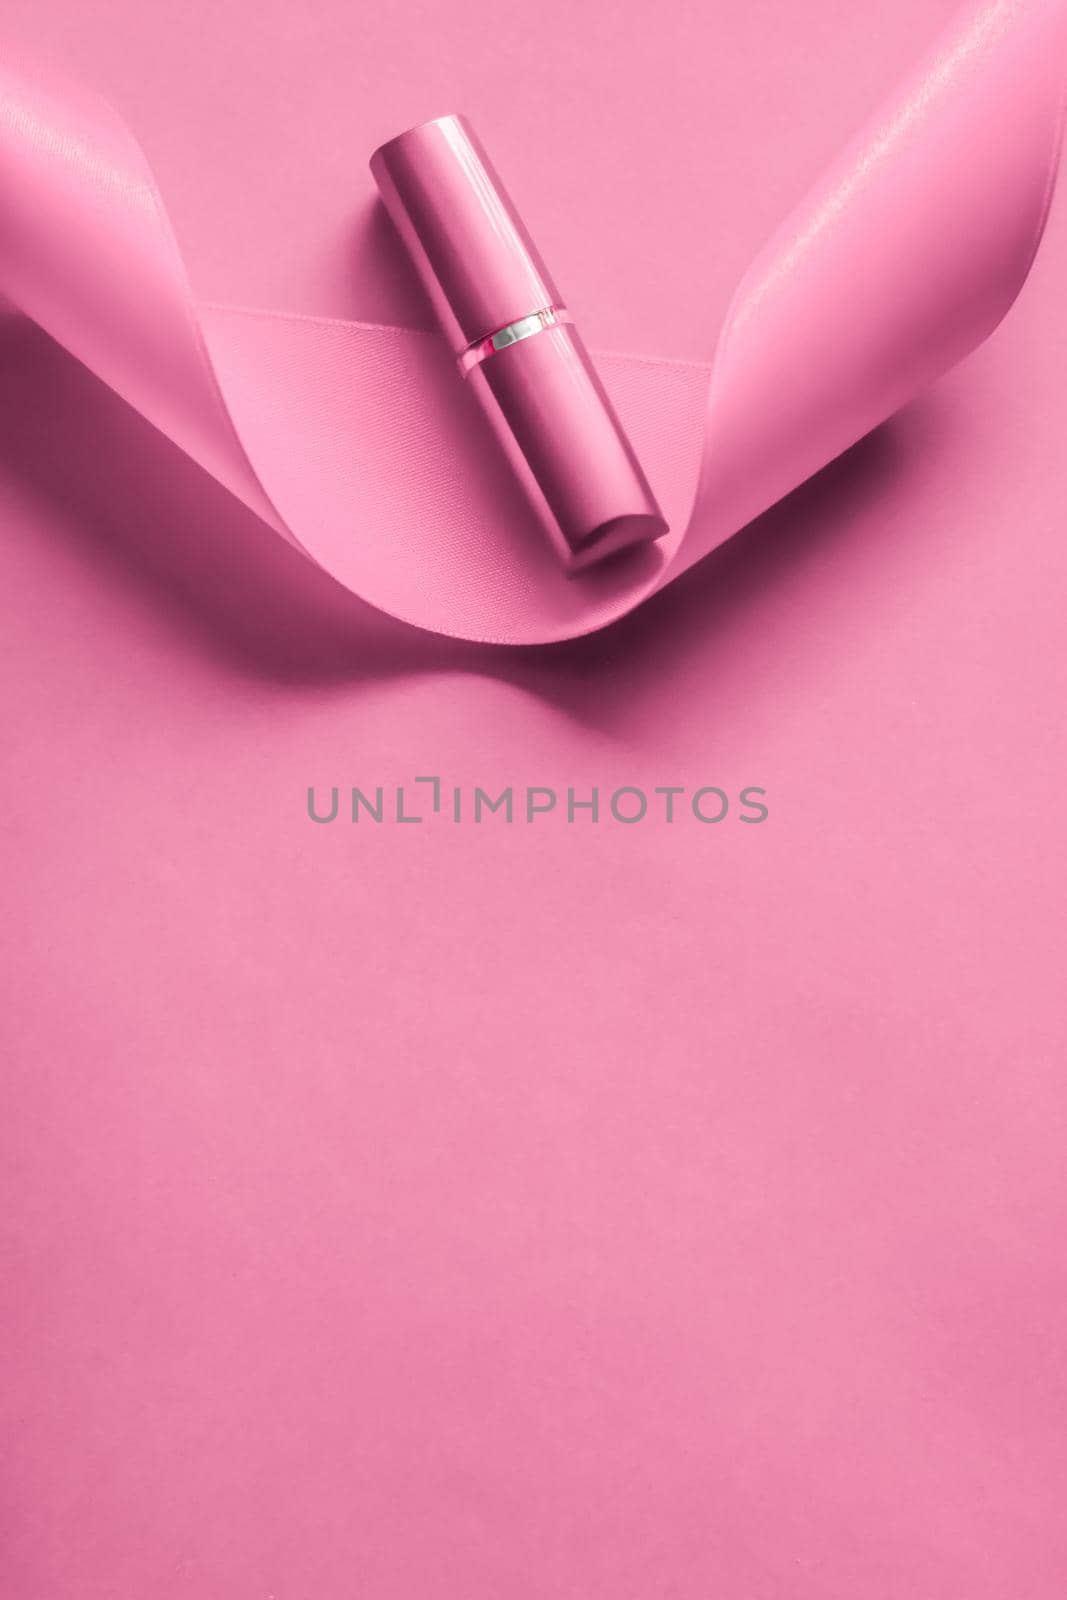 Luxury lipstick and silk ribbon on pink holiday background, make-up and cosmetics flatlay for beauty brand product design by Anneleven